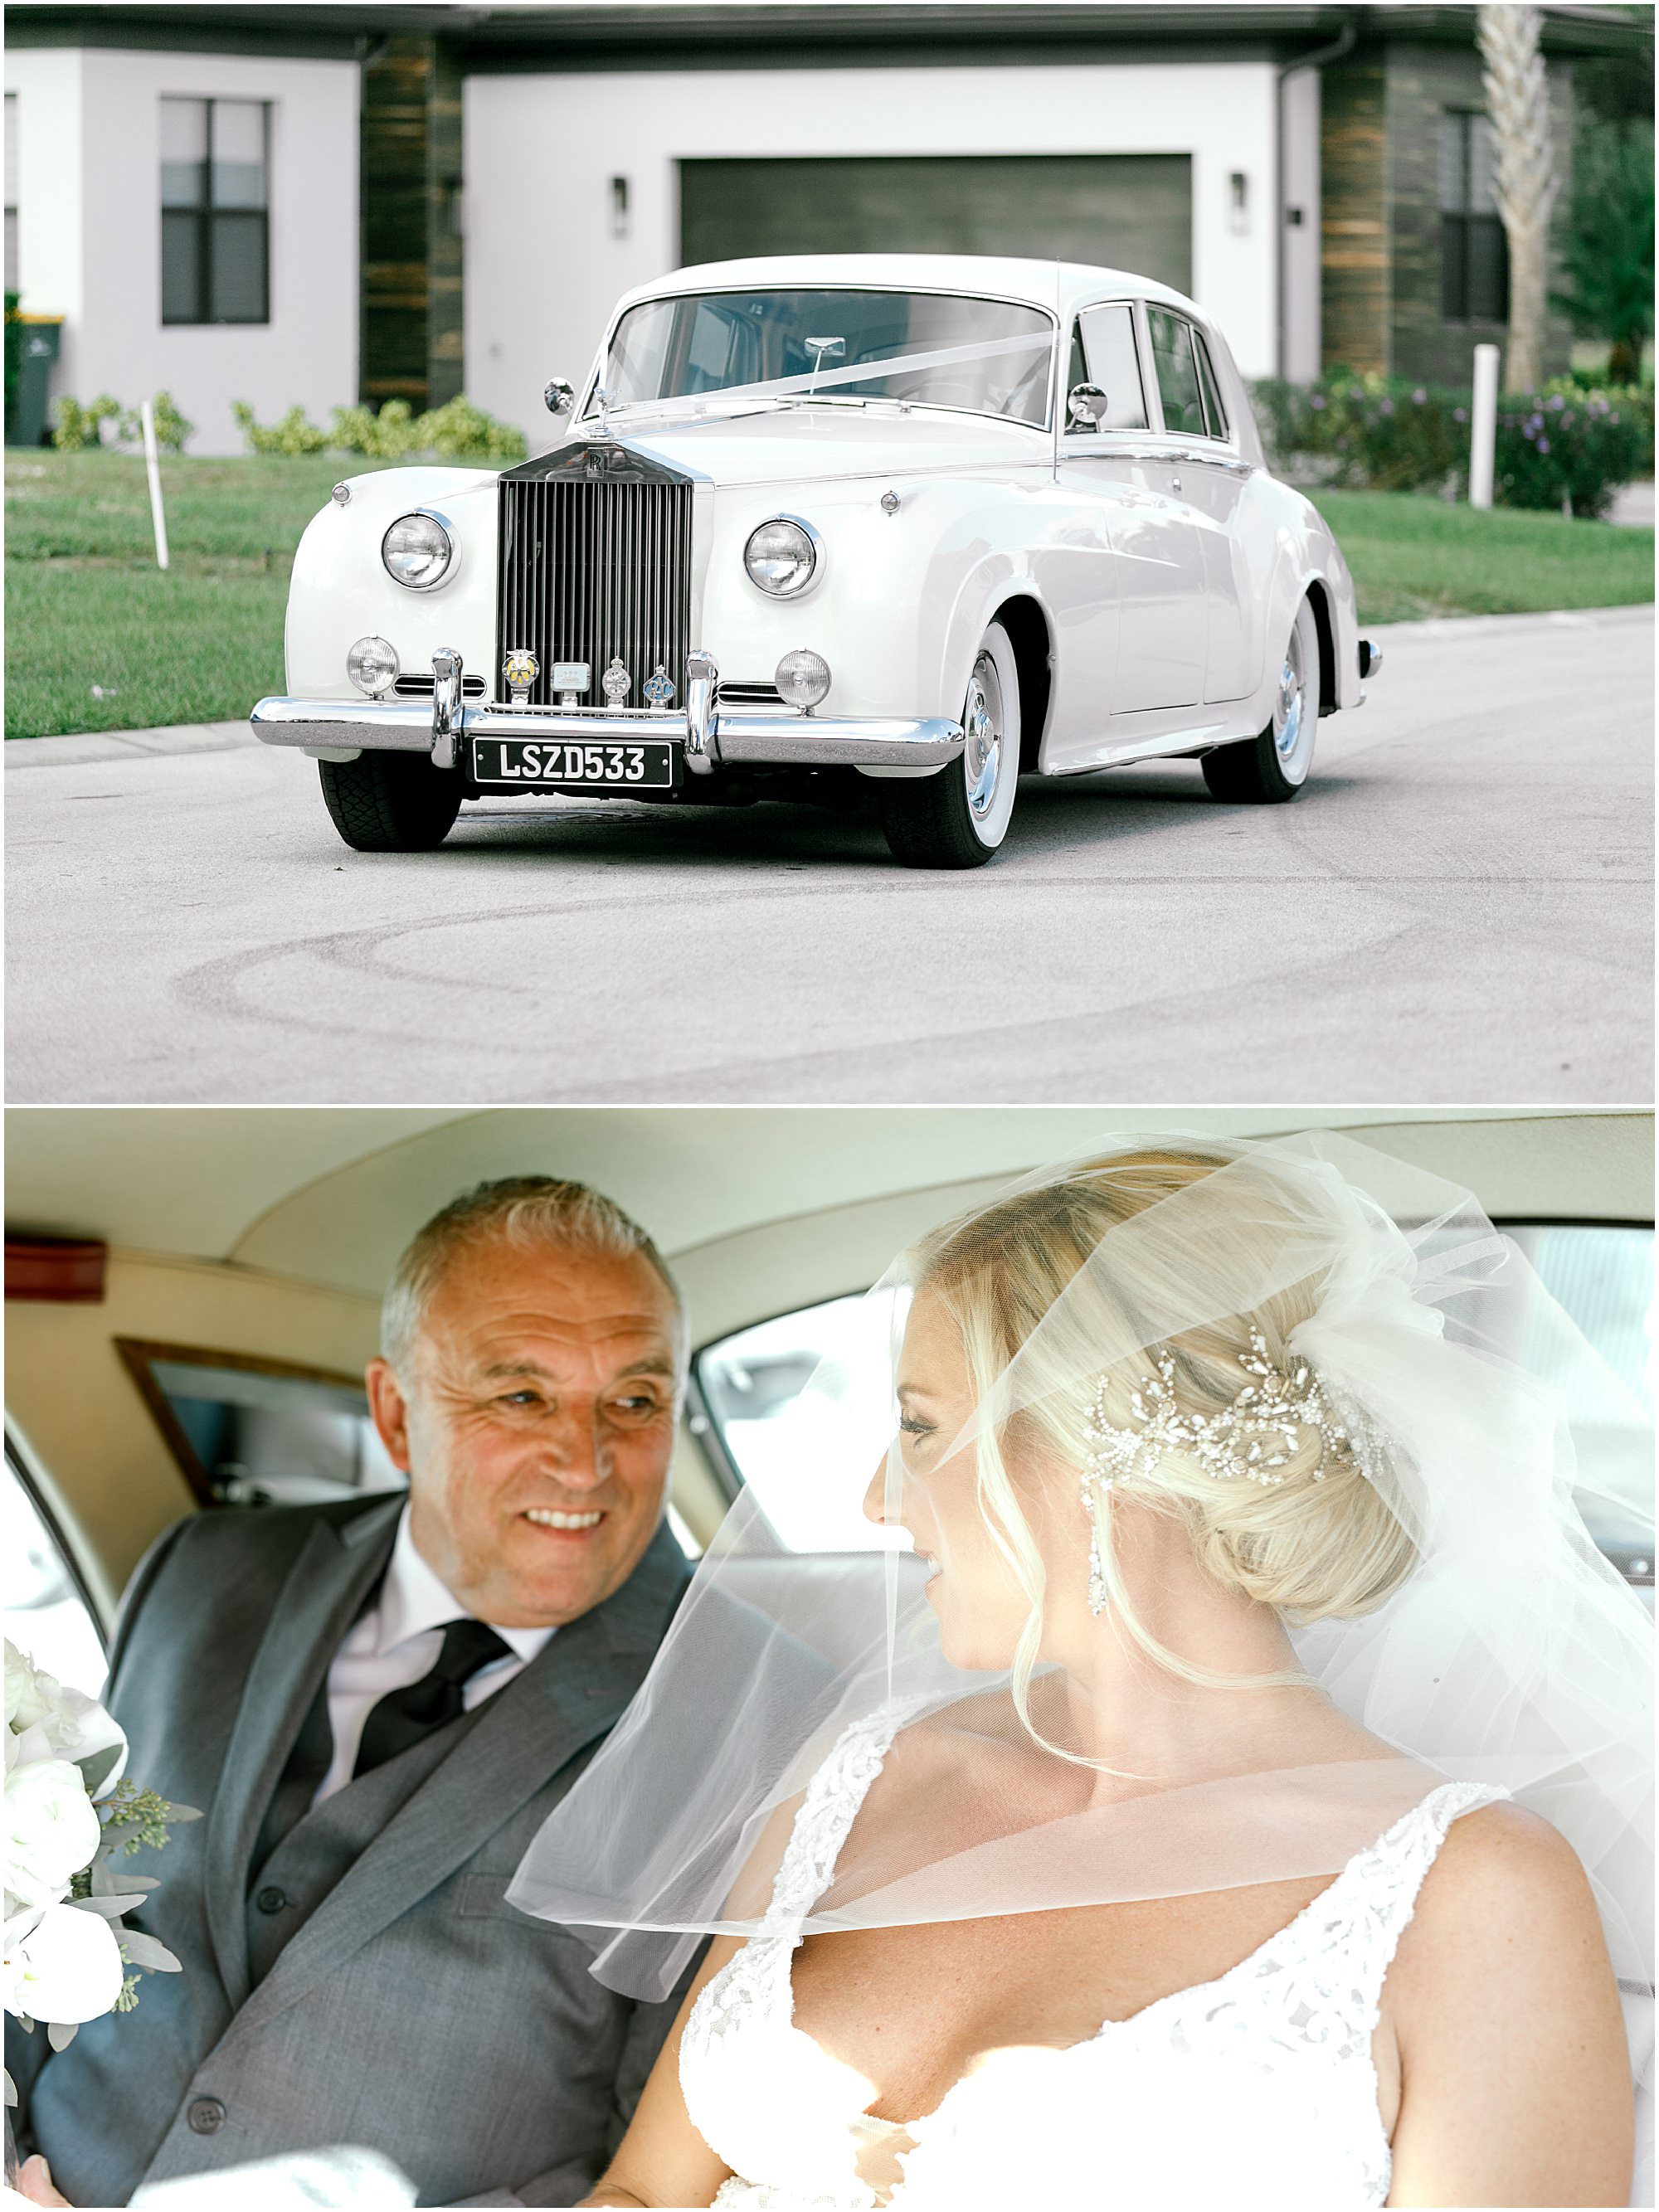 Bride and her father in a Rolls Royce traveling to the wedding ceremony